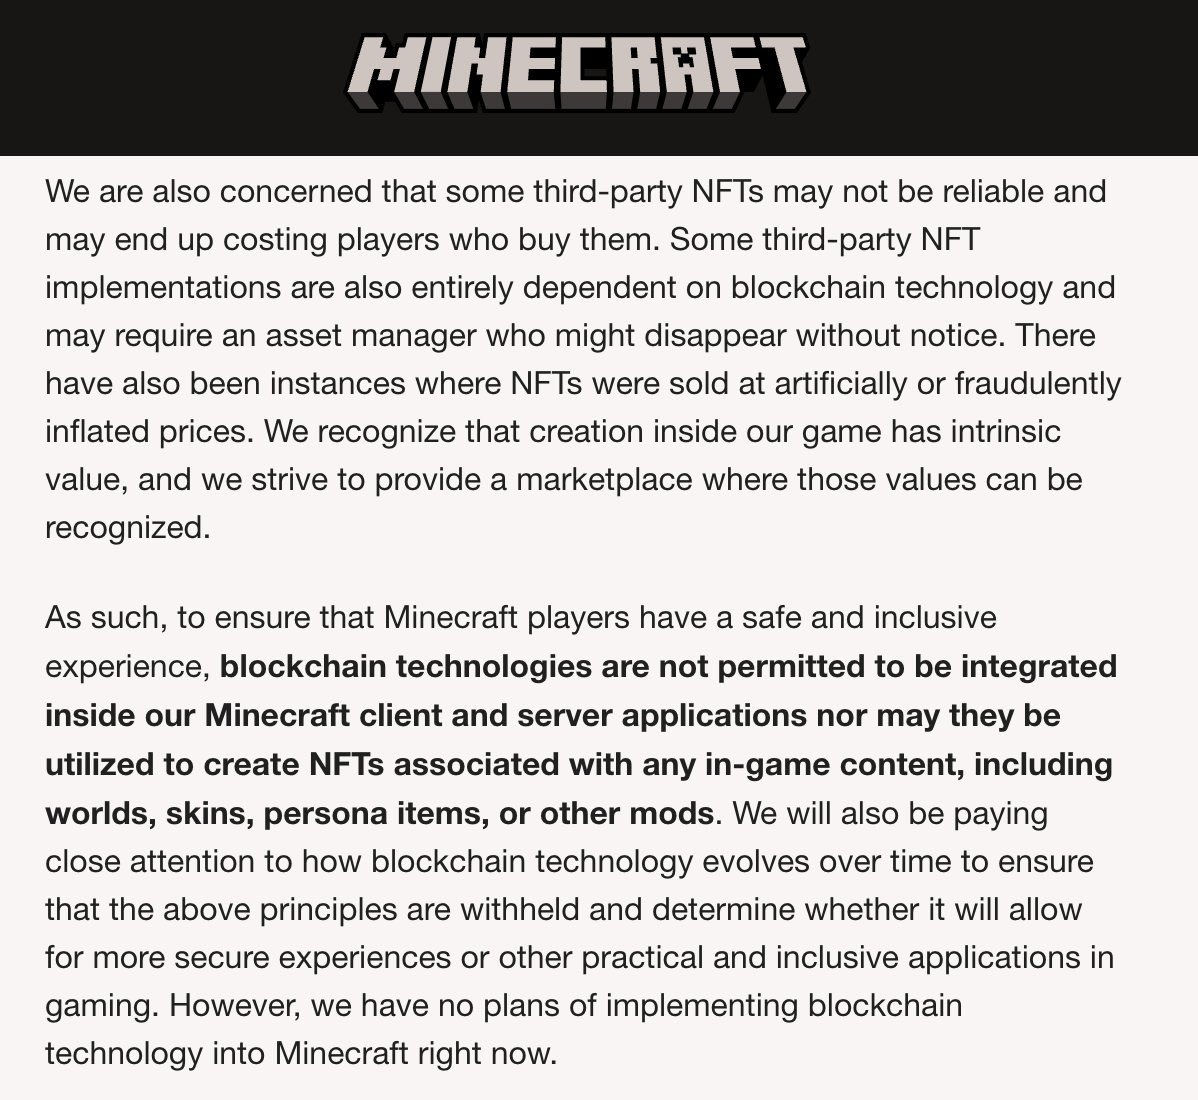 Minecraft's message banning all NFT's